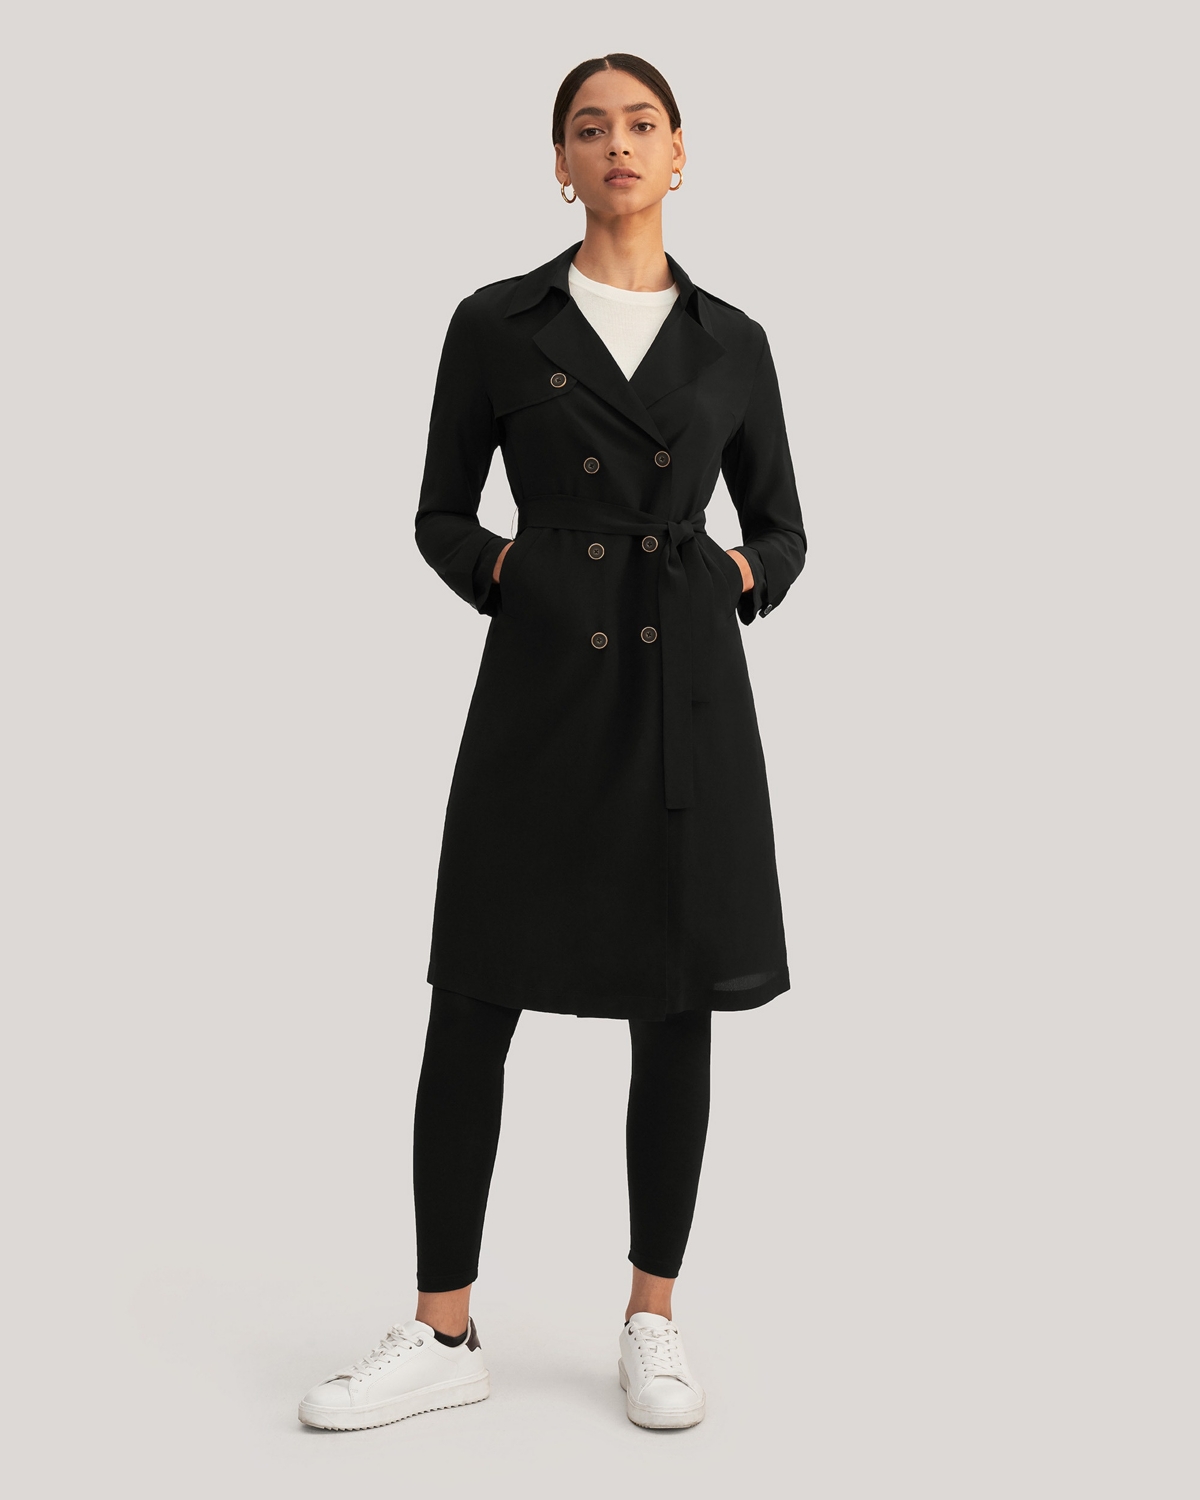 Women's Classic Double-Breasted Silk Trench Coat - Greige